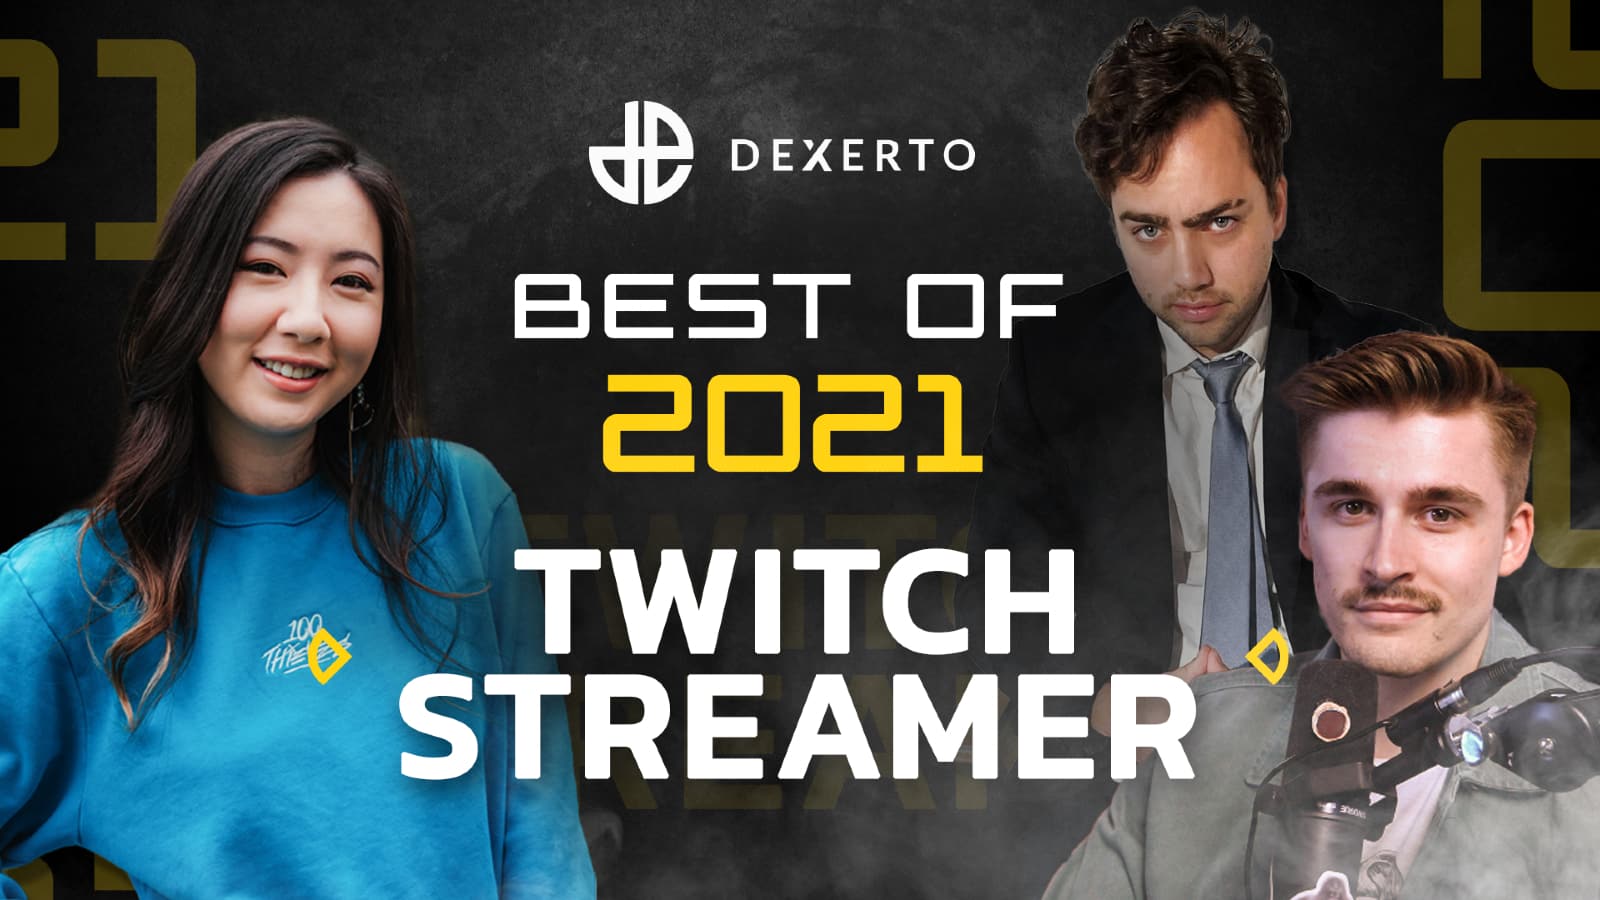 The Top 12 Twitch Streamers of 2021